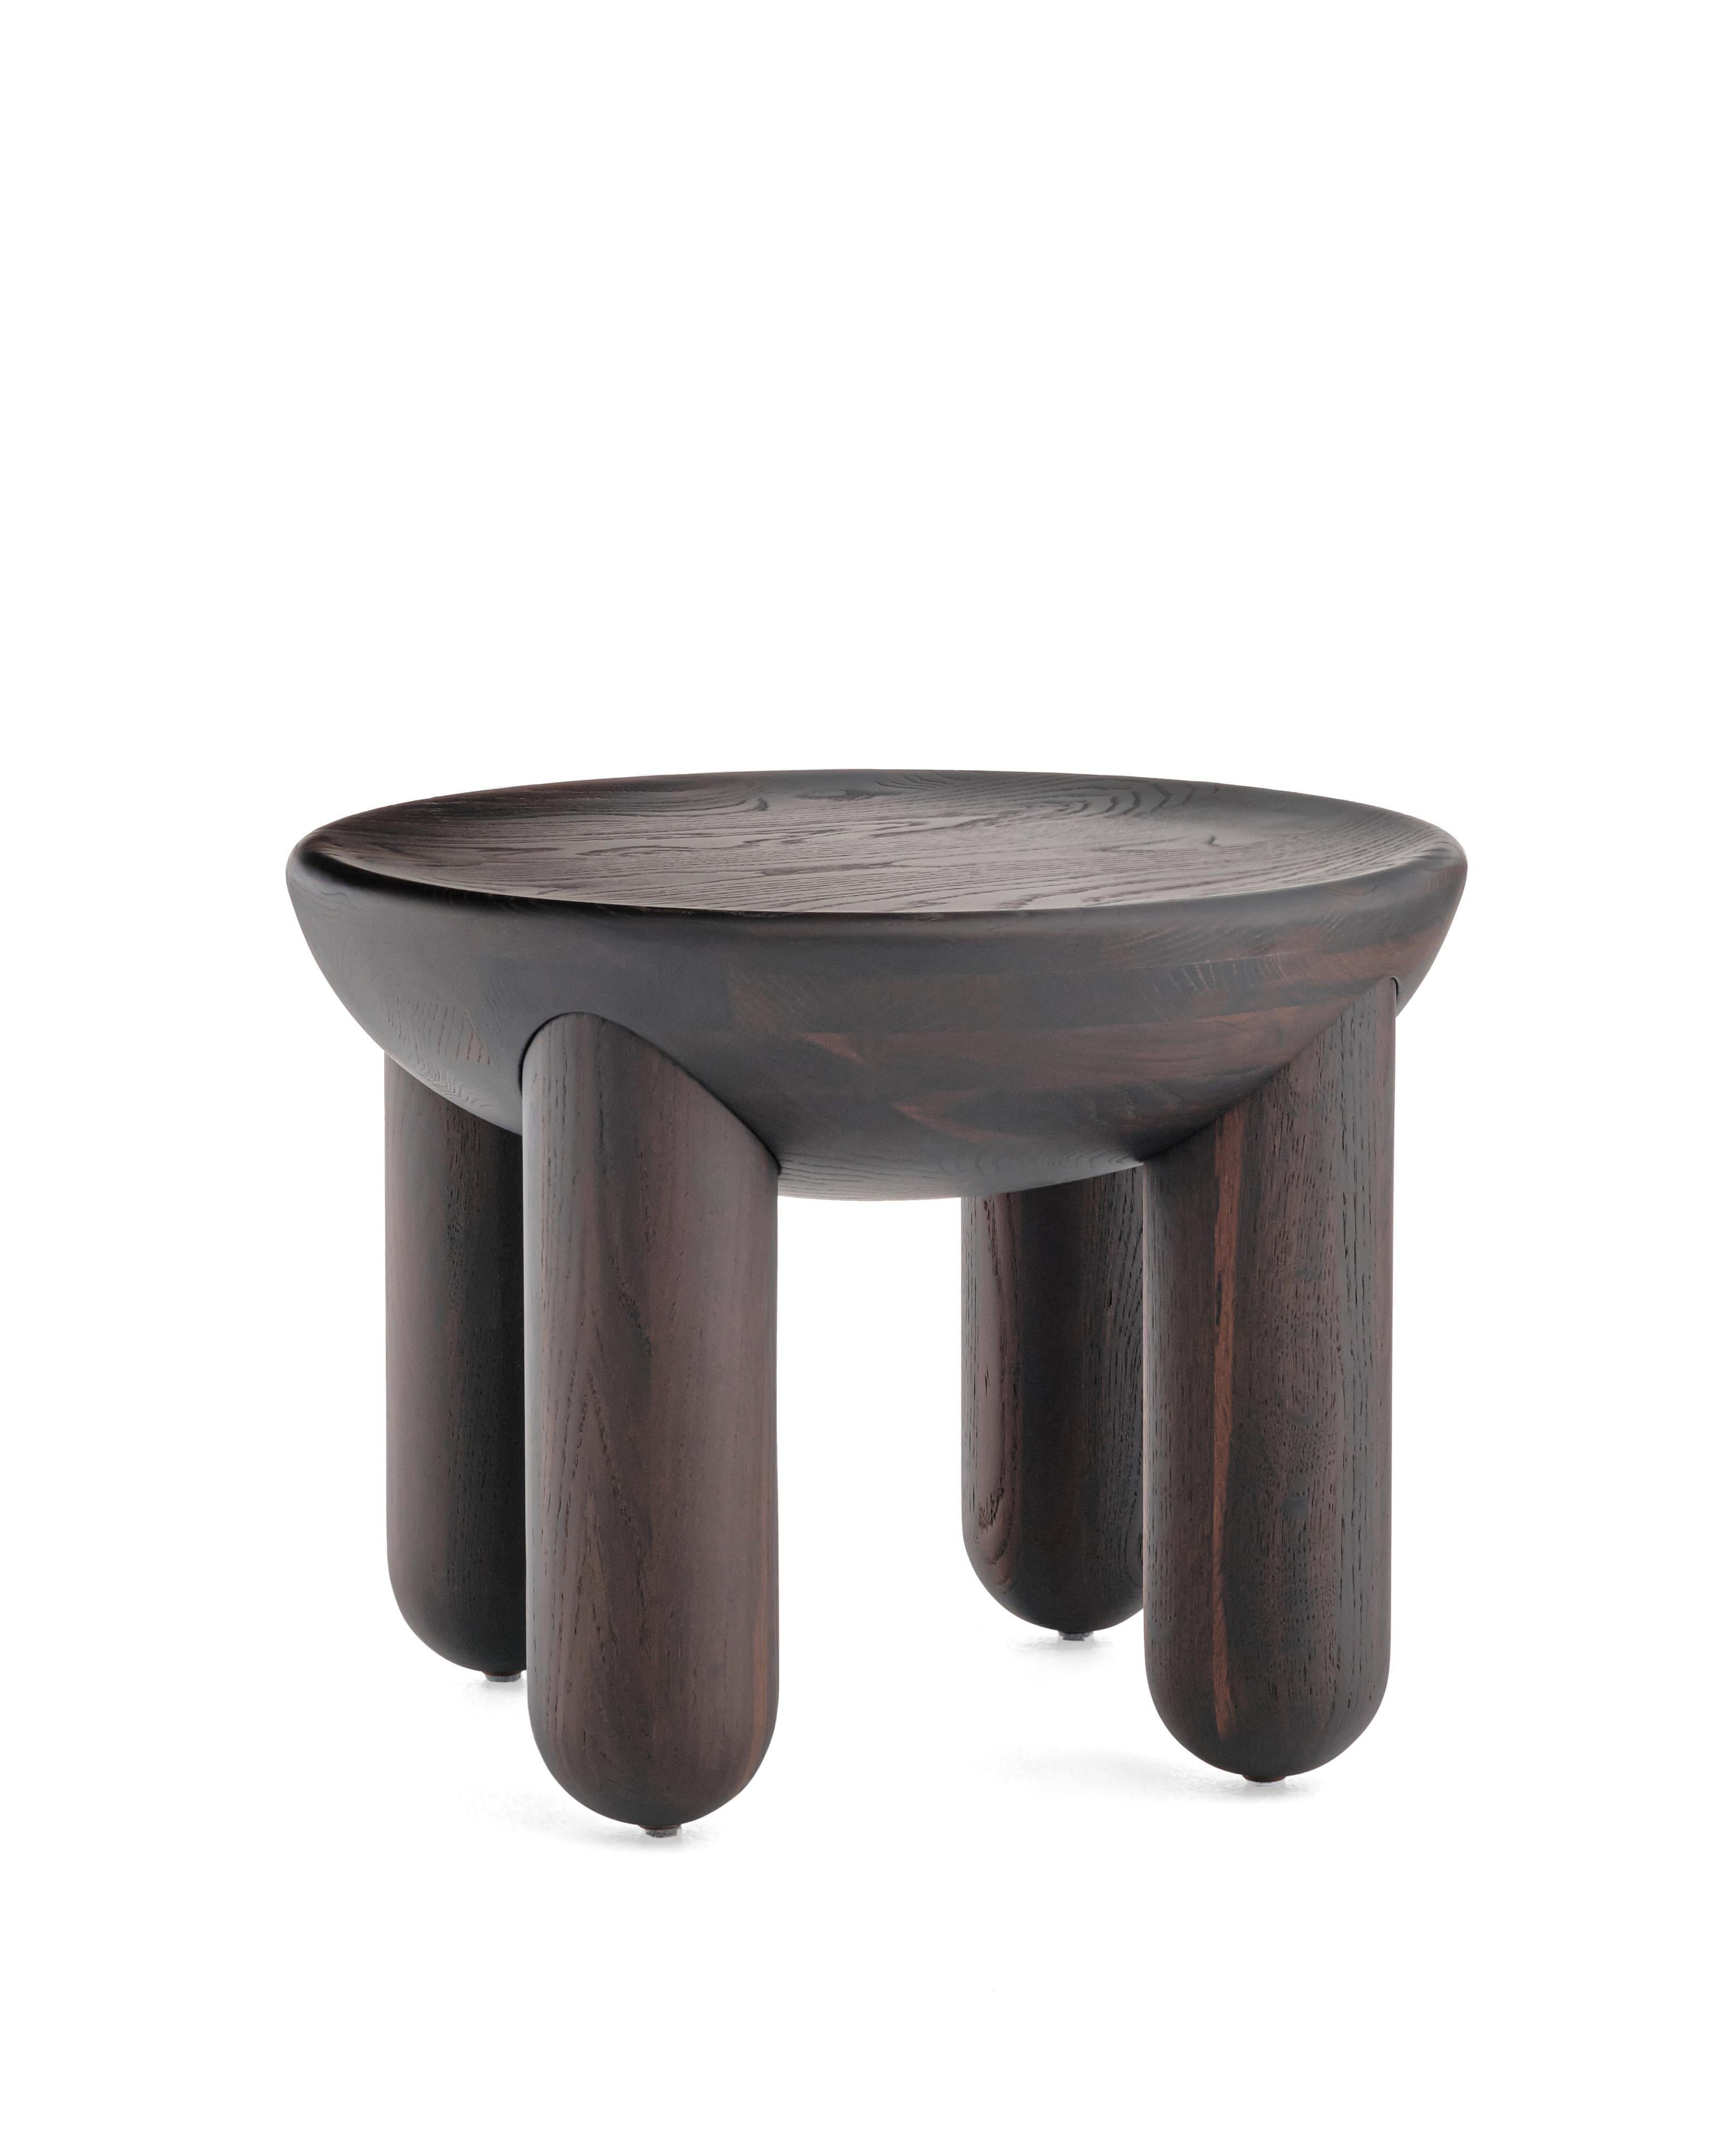 Organic Modern Contemporary Wooden Coffee or Side Table 'Freyja 2' by Noom, Thermo Ash For Sale